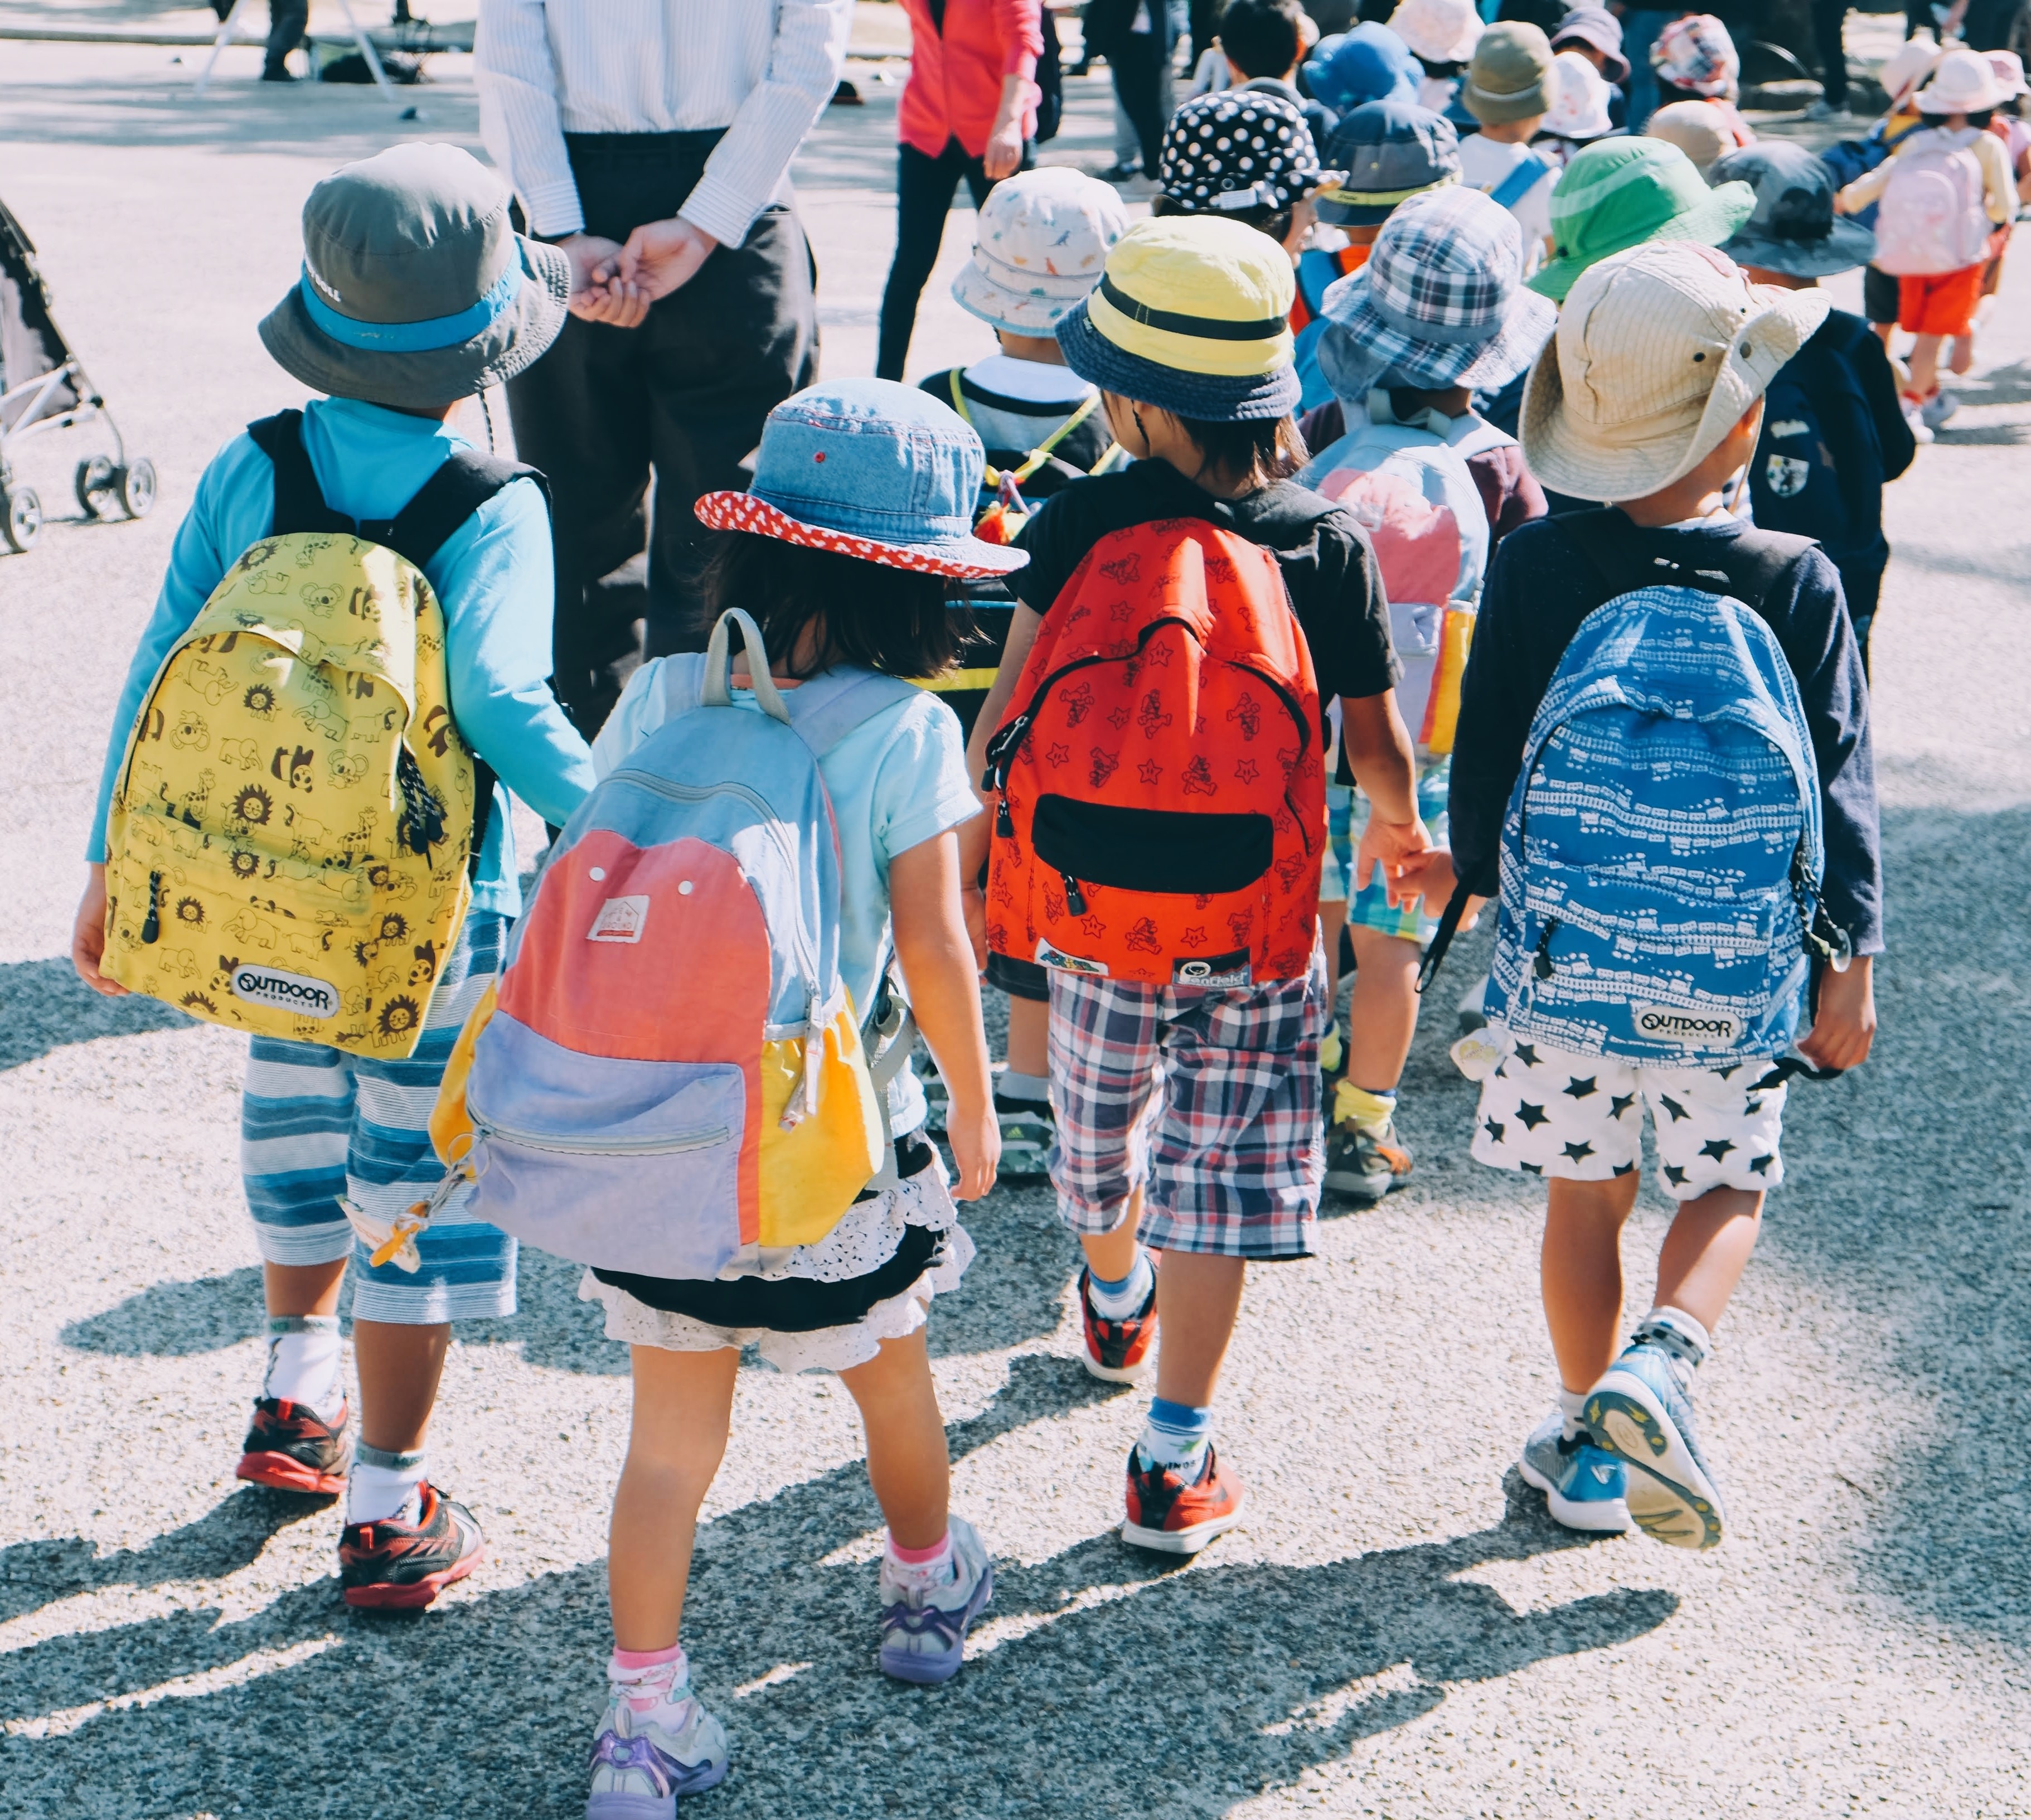 A group of primary school aged students walk together, seen from behind with colorful backpacks.